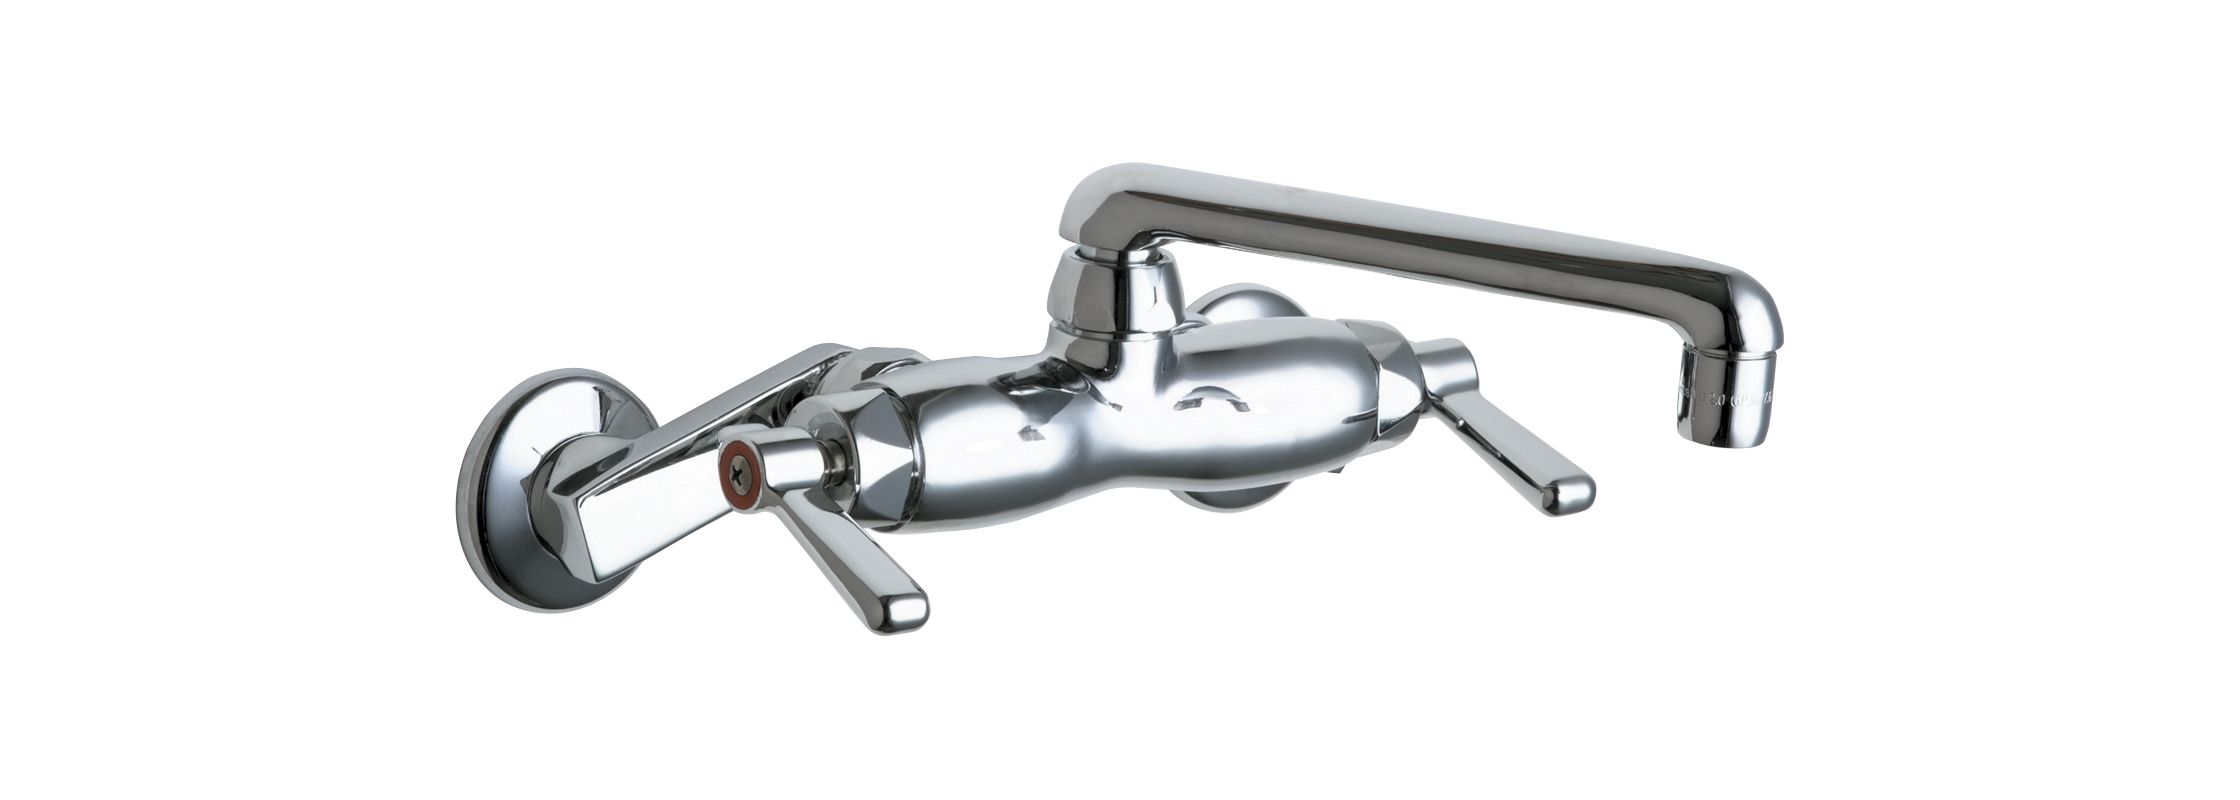 Faucetcom 445 ABCP In Chrome By Chicago Faucets